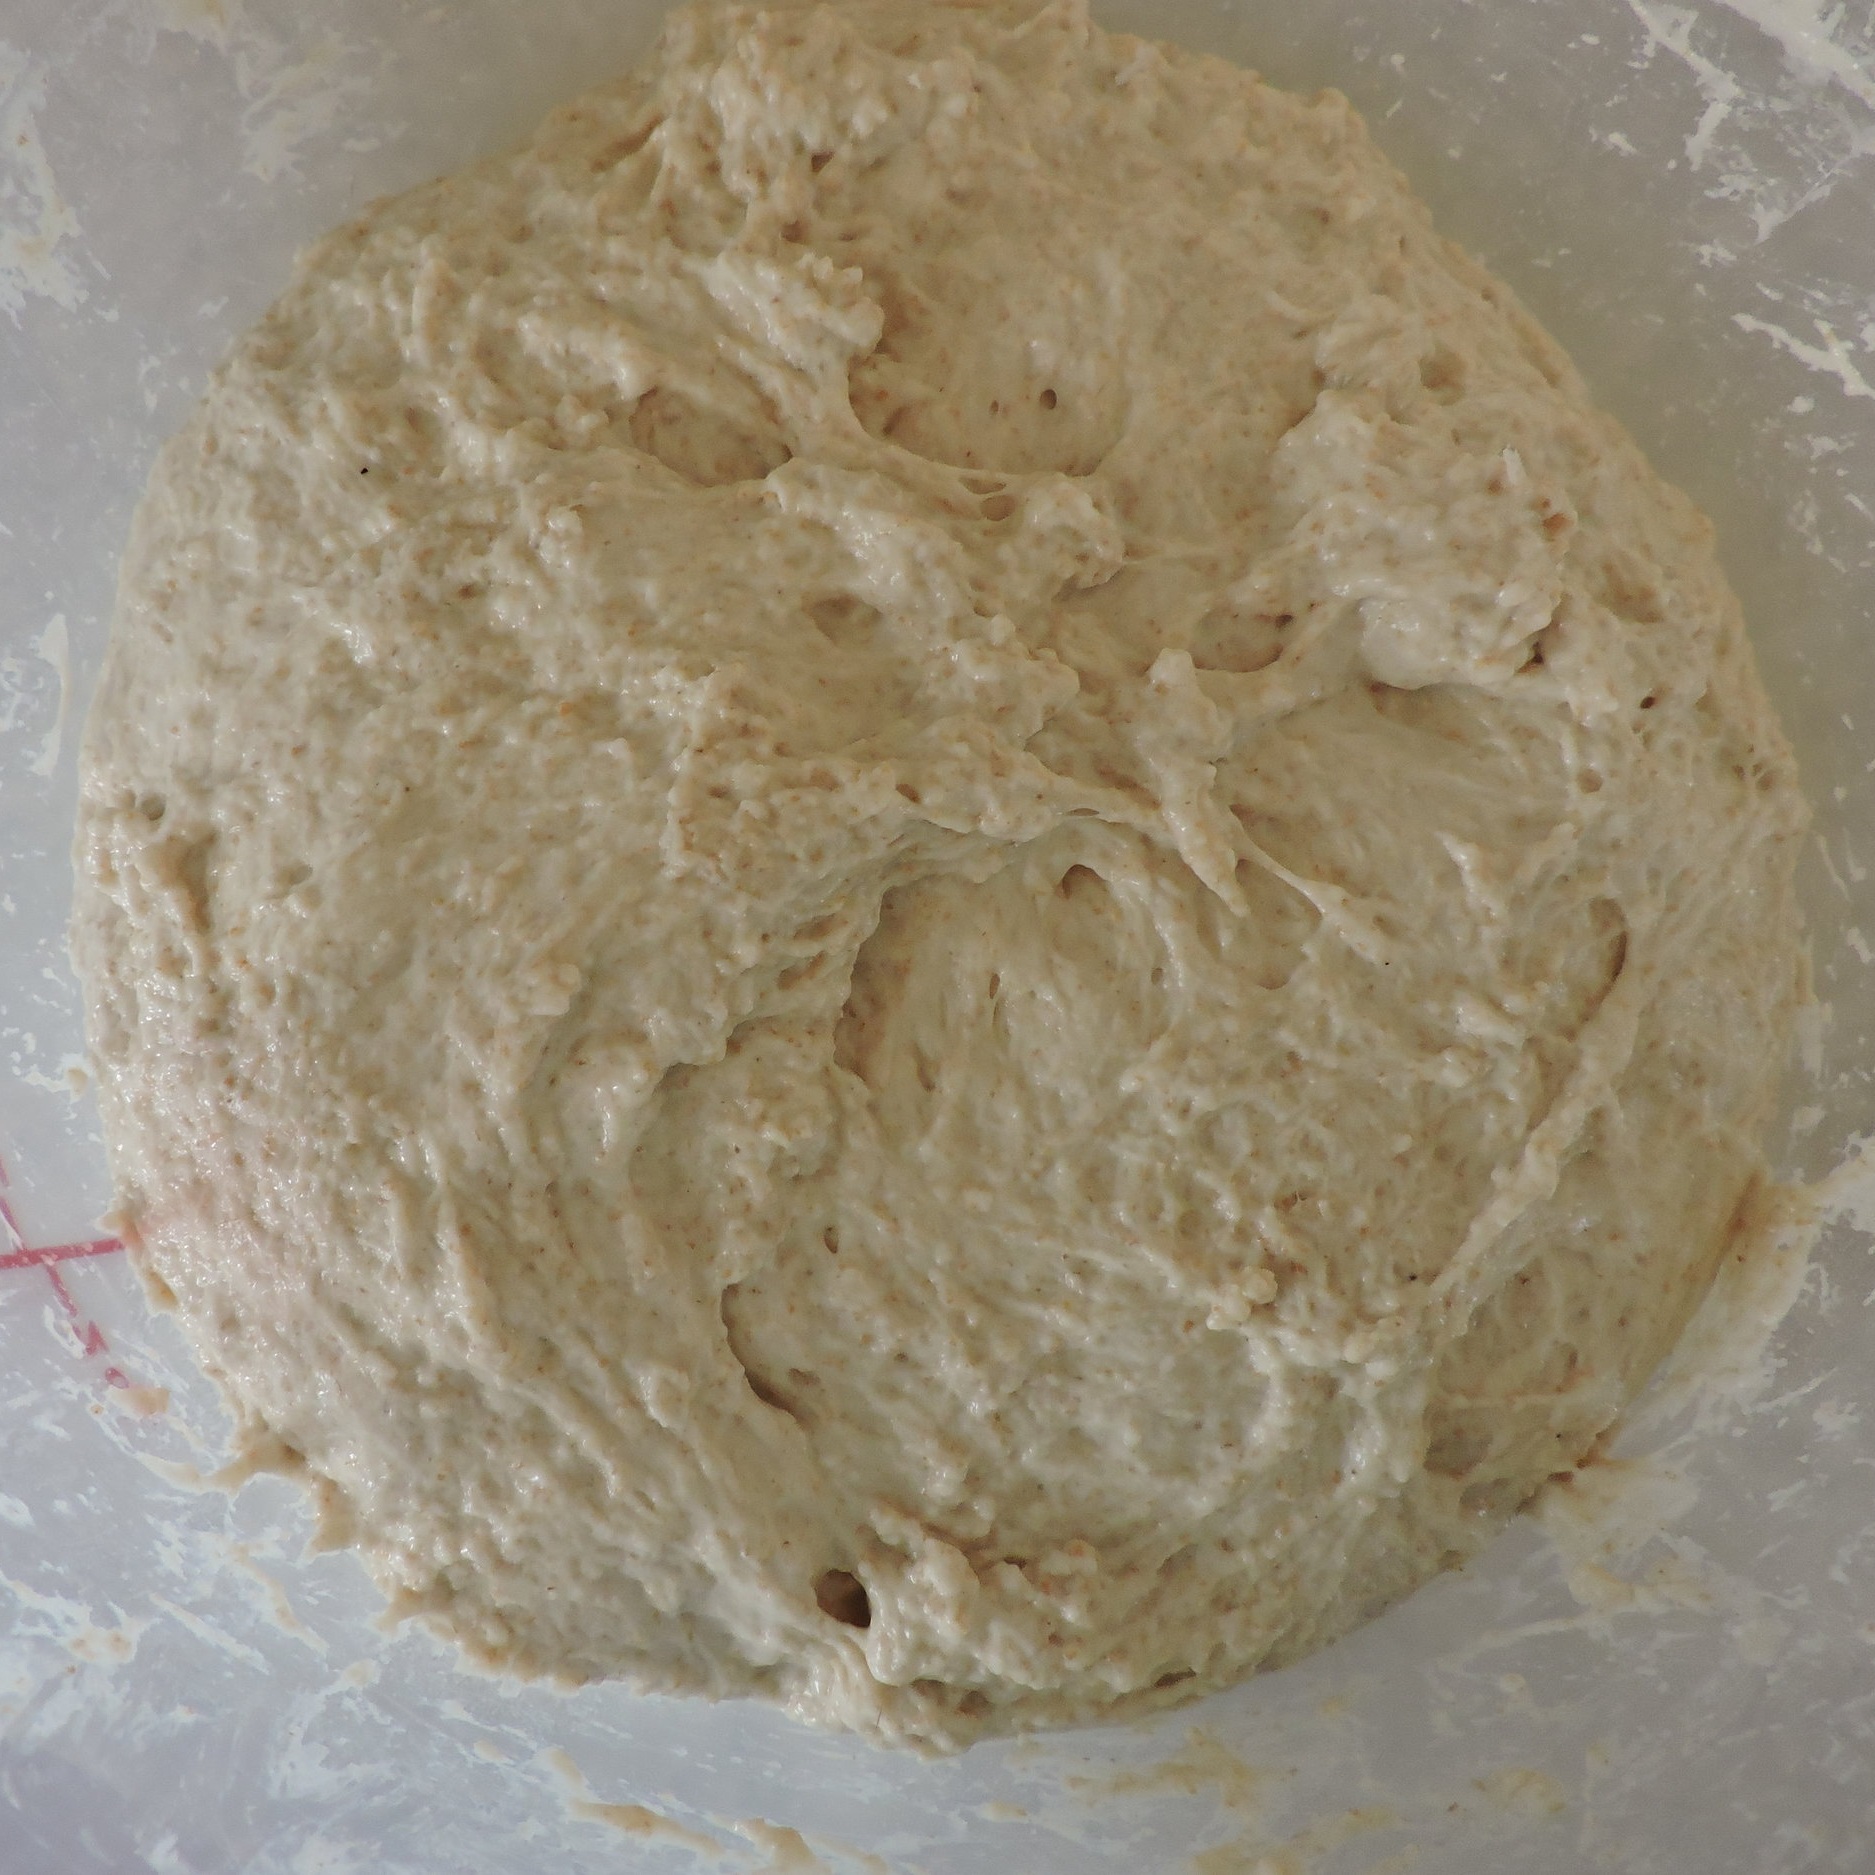  I’ve added the autolyse to the biga, so this is the final dough, thoroughly mixed.  